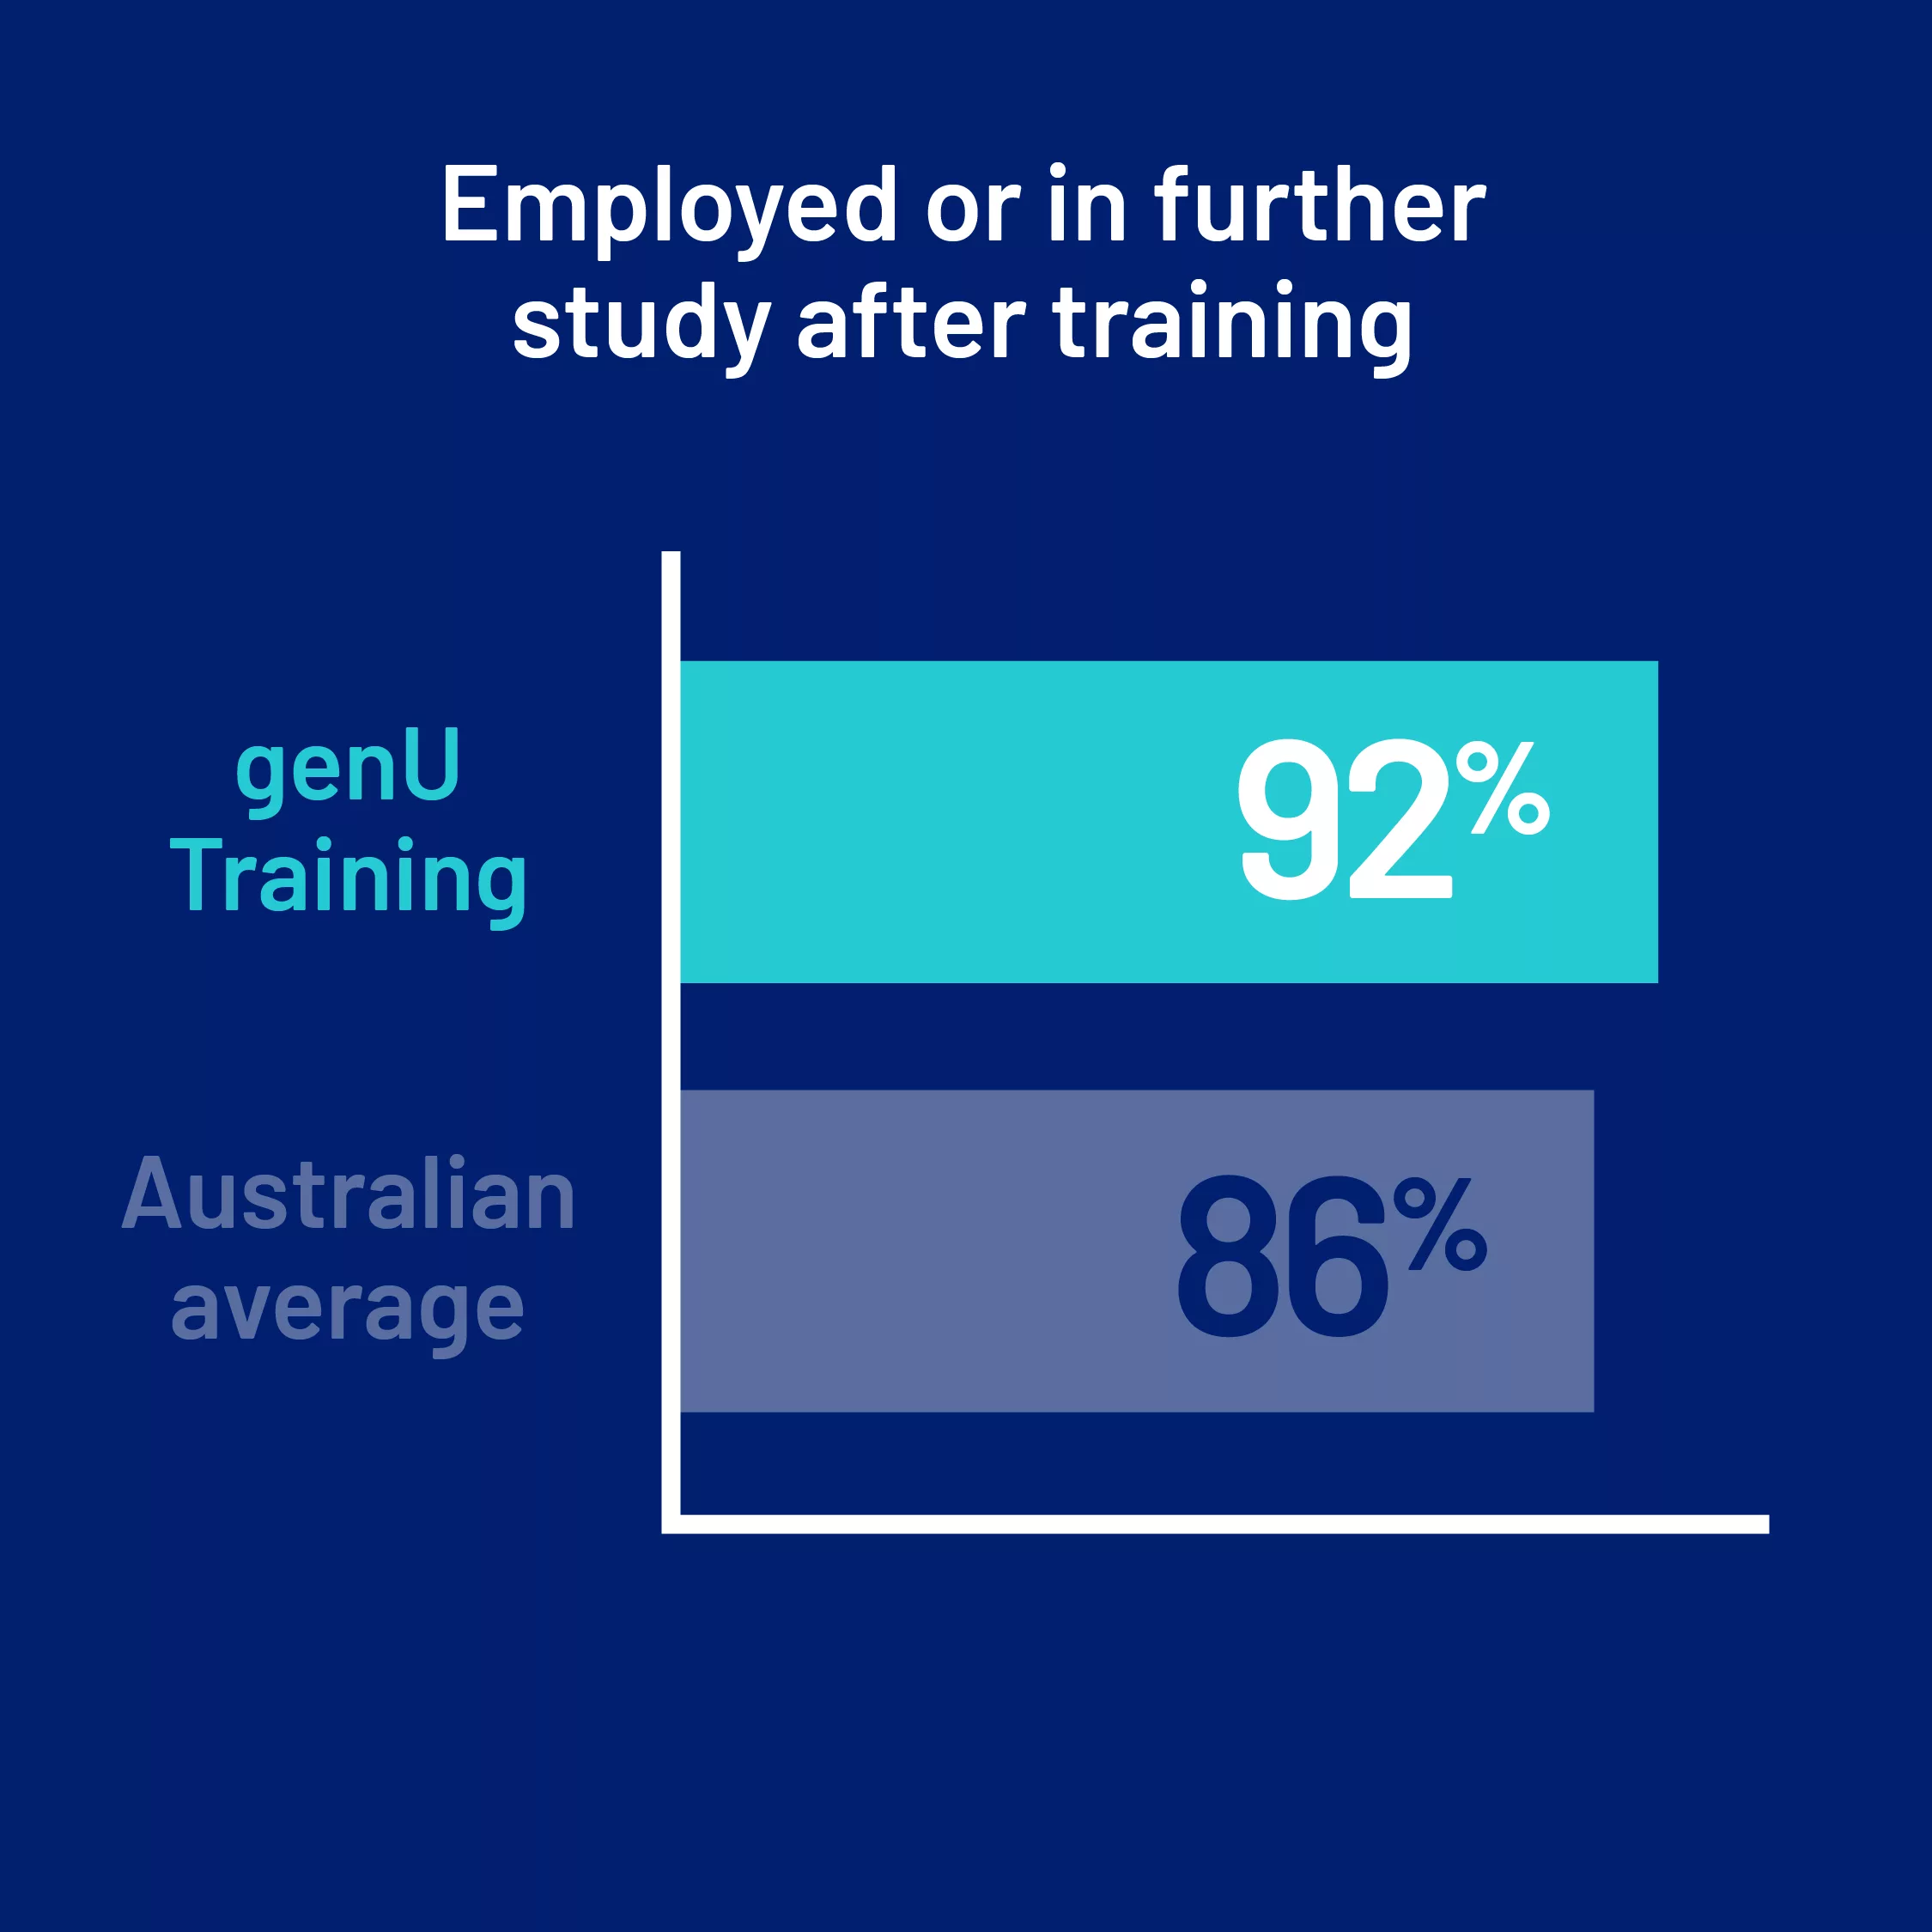 An infographic which shows a higher percentage of genU Training students are employed or enrolled in further study after training, compared to the national average